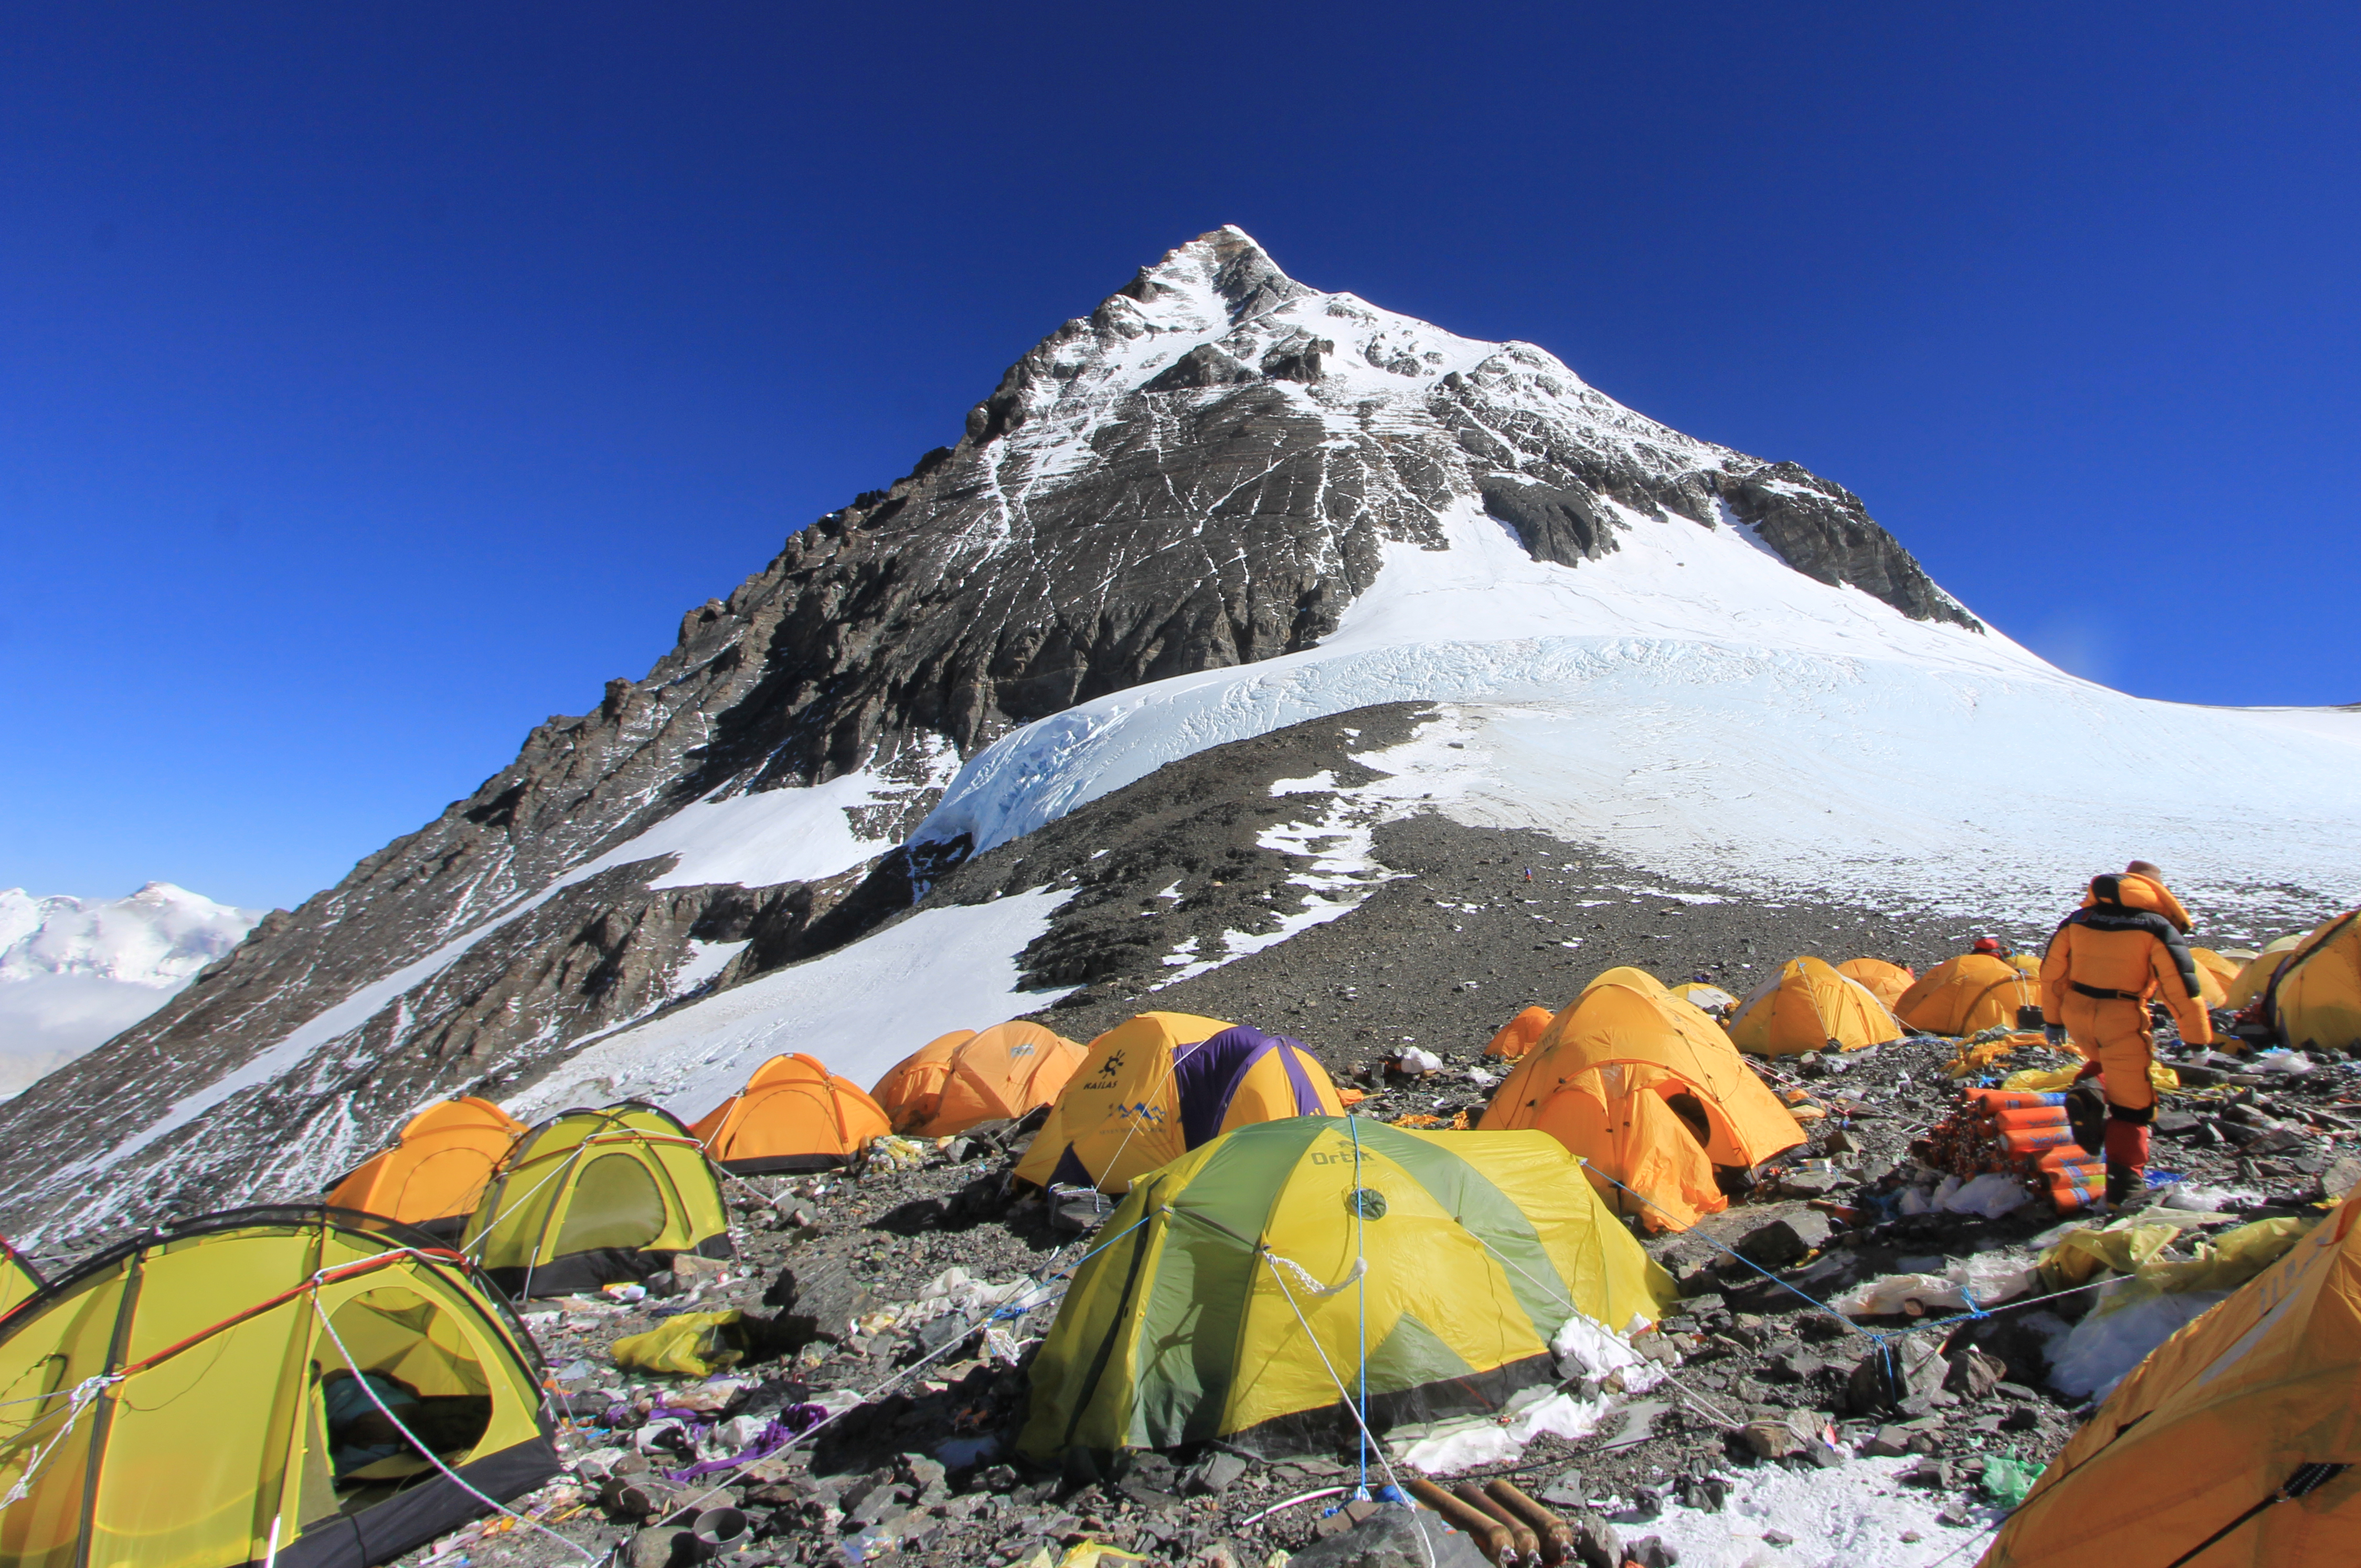 A view of the summit of Everest from the South Col – a pass at 8 000 metres between Everest and Lhotse where the final base camp is situated. Photo: Mirza Ali